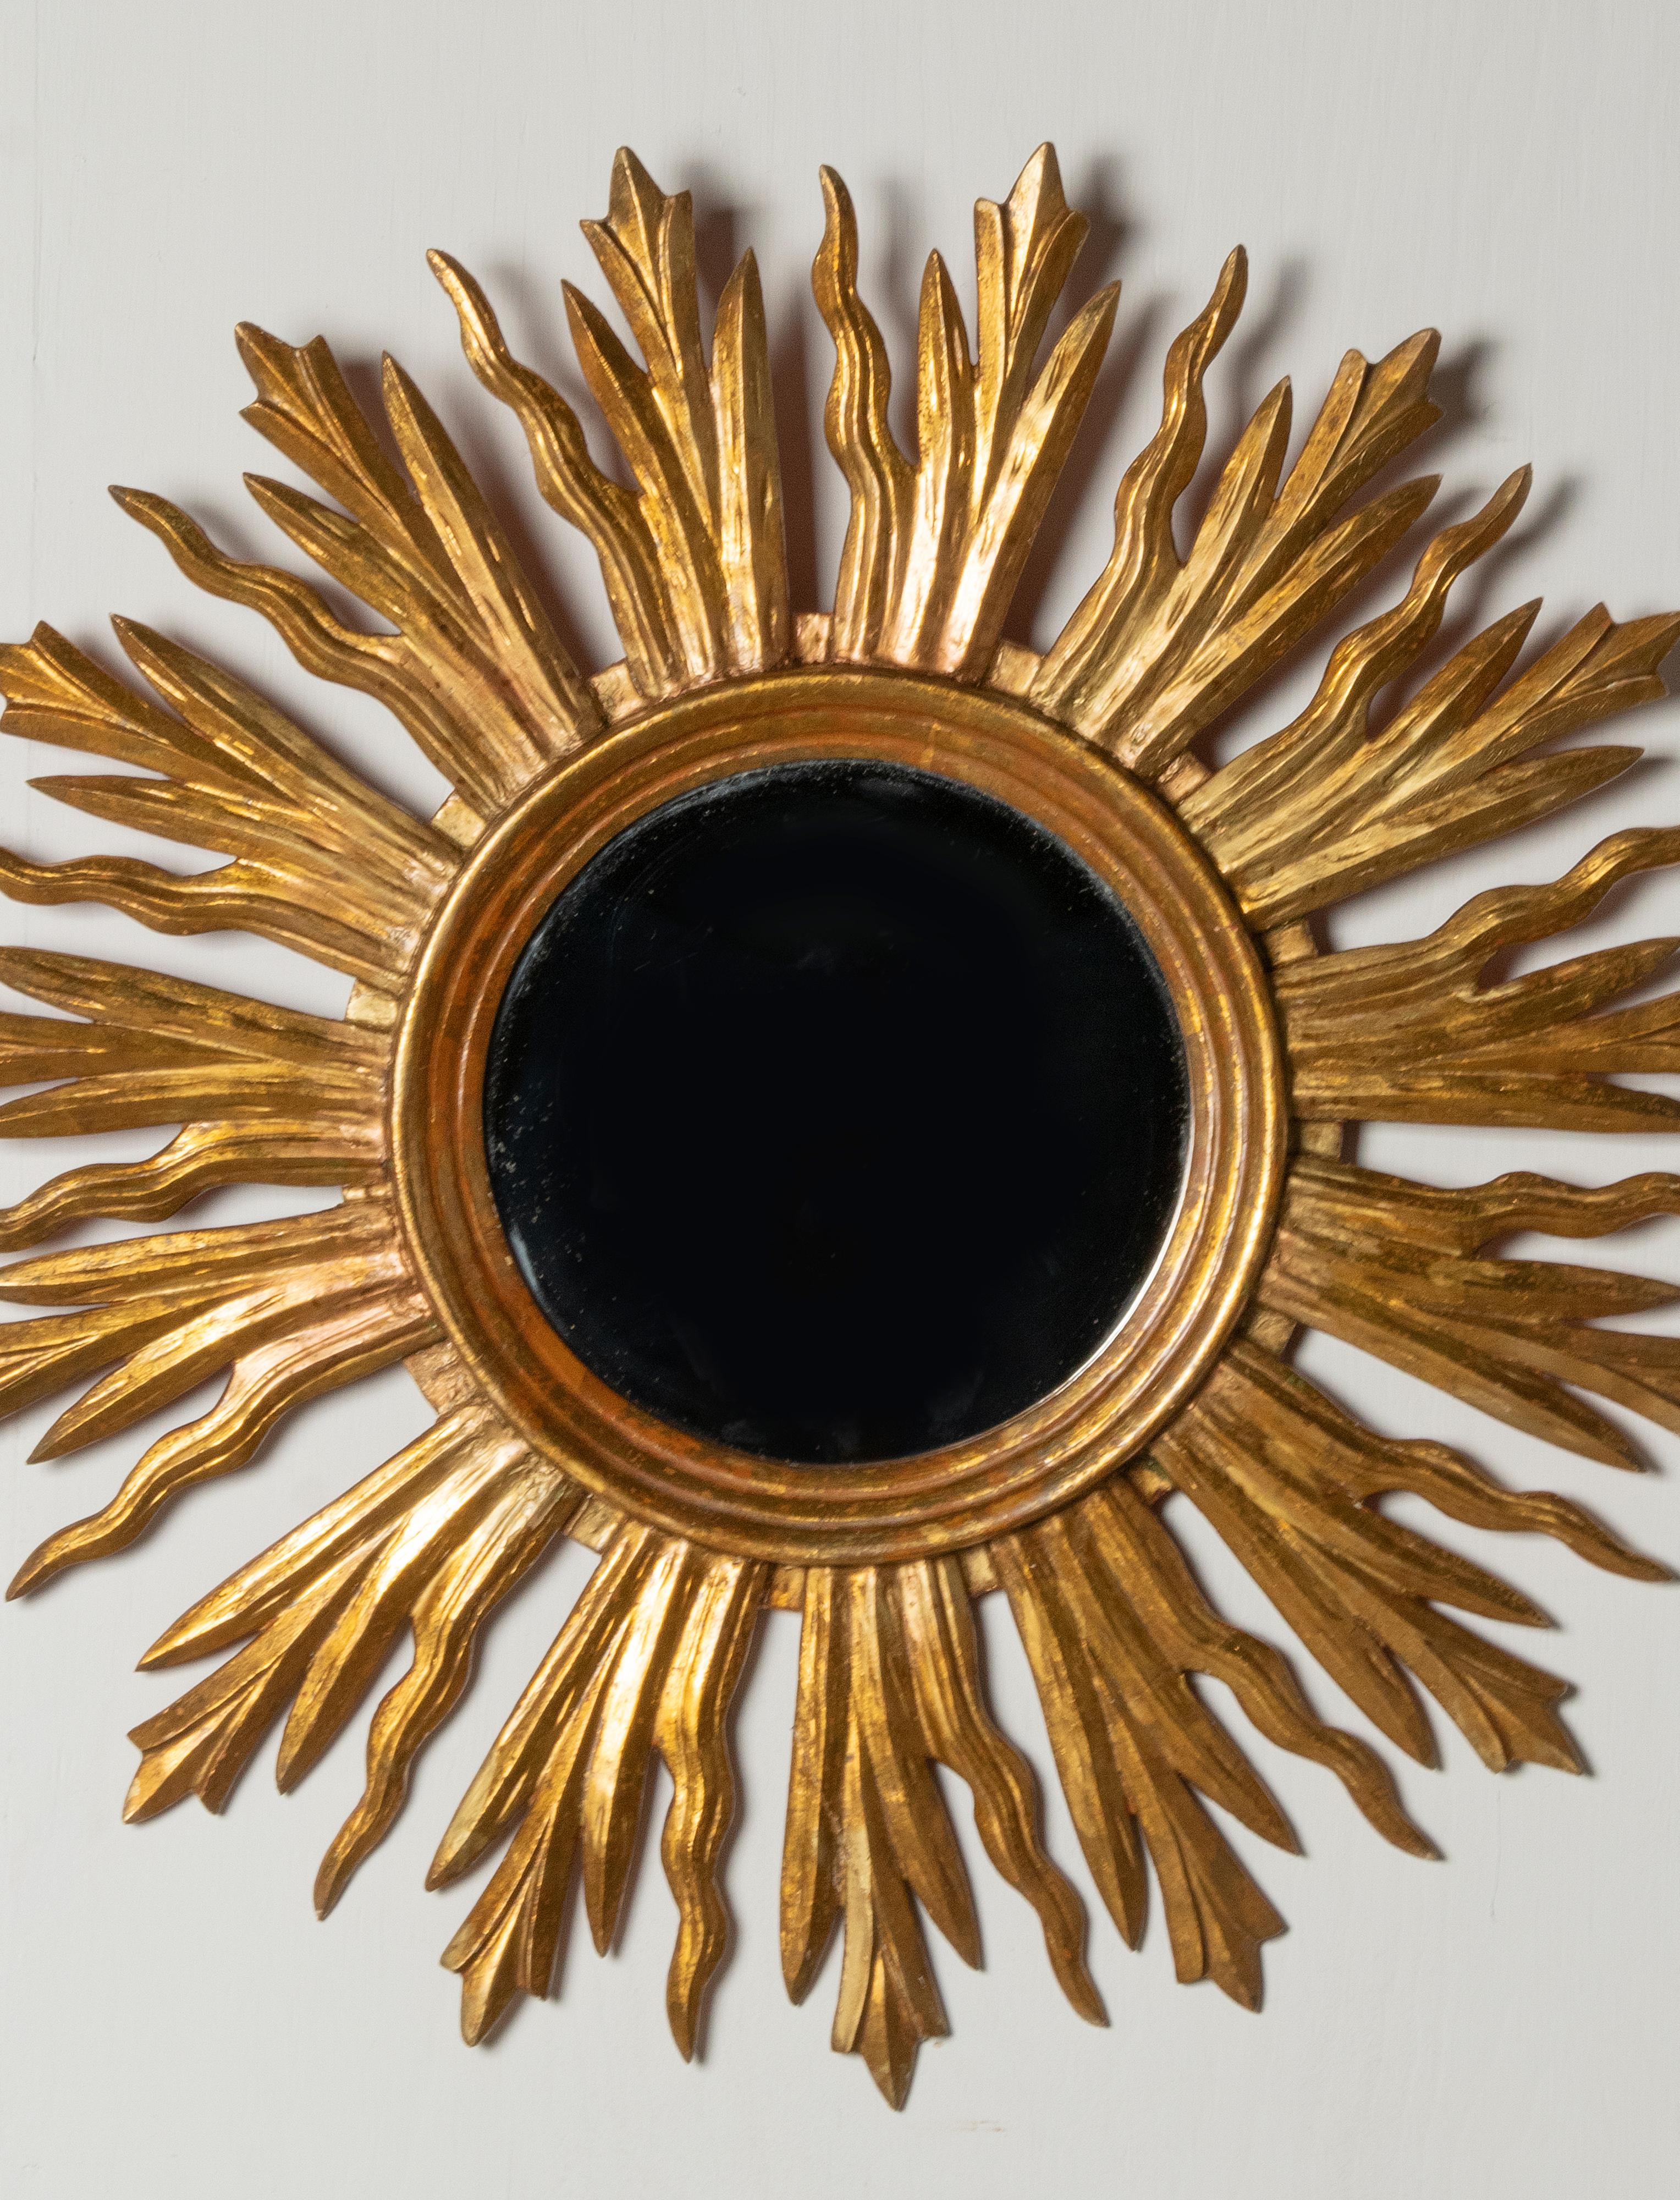 Large gilded sunburst mirror with beautiful wooden carved rays. The mirror glass is flat, and have no stains and wear. The mirror dates from circa 1950-1960, from France. This mirror is entirely made of wood.